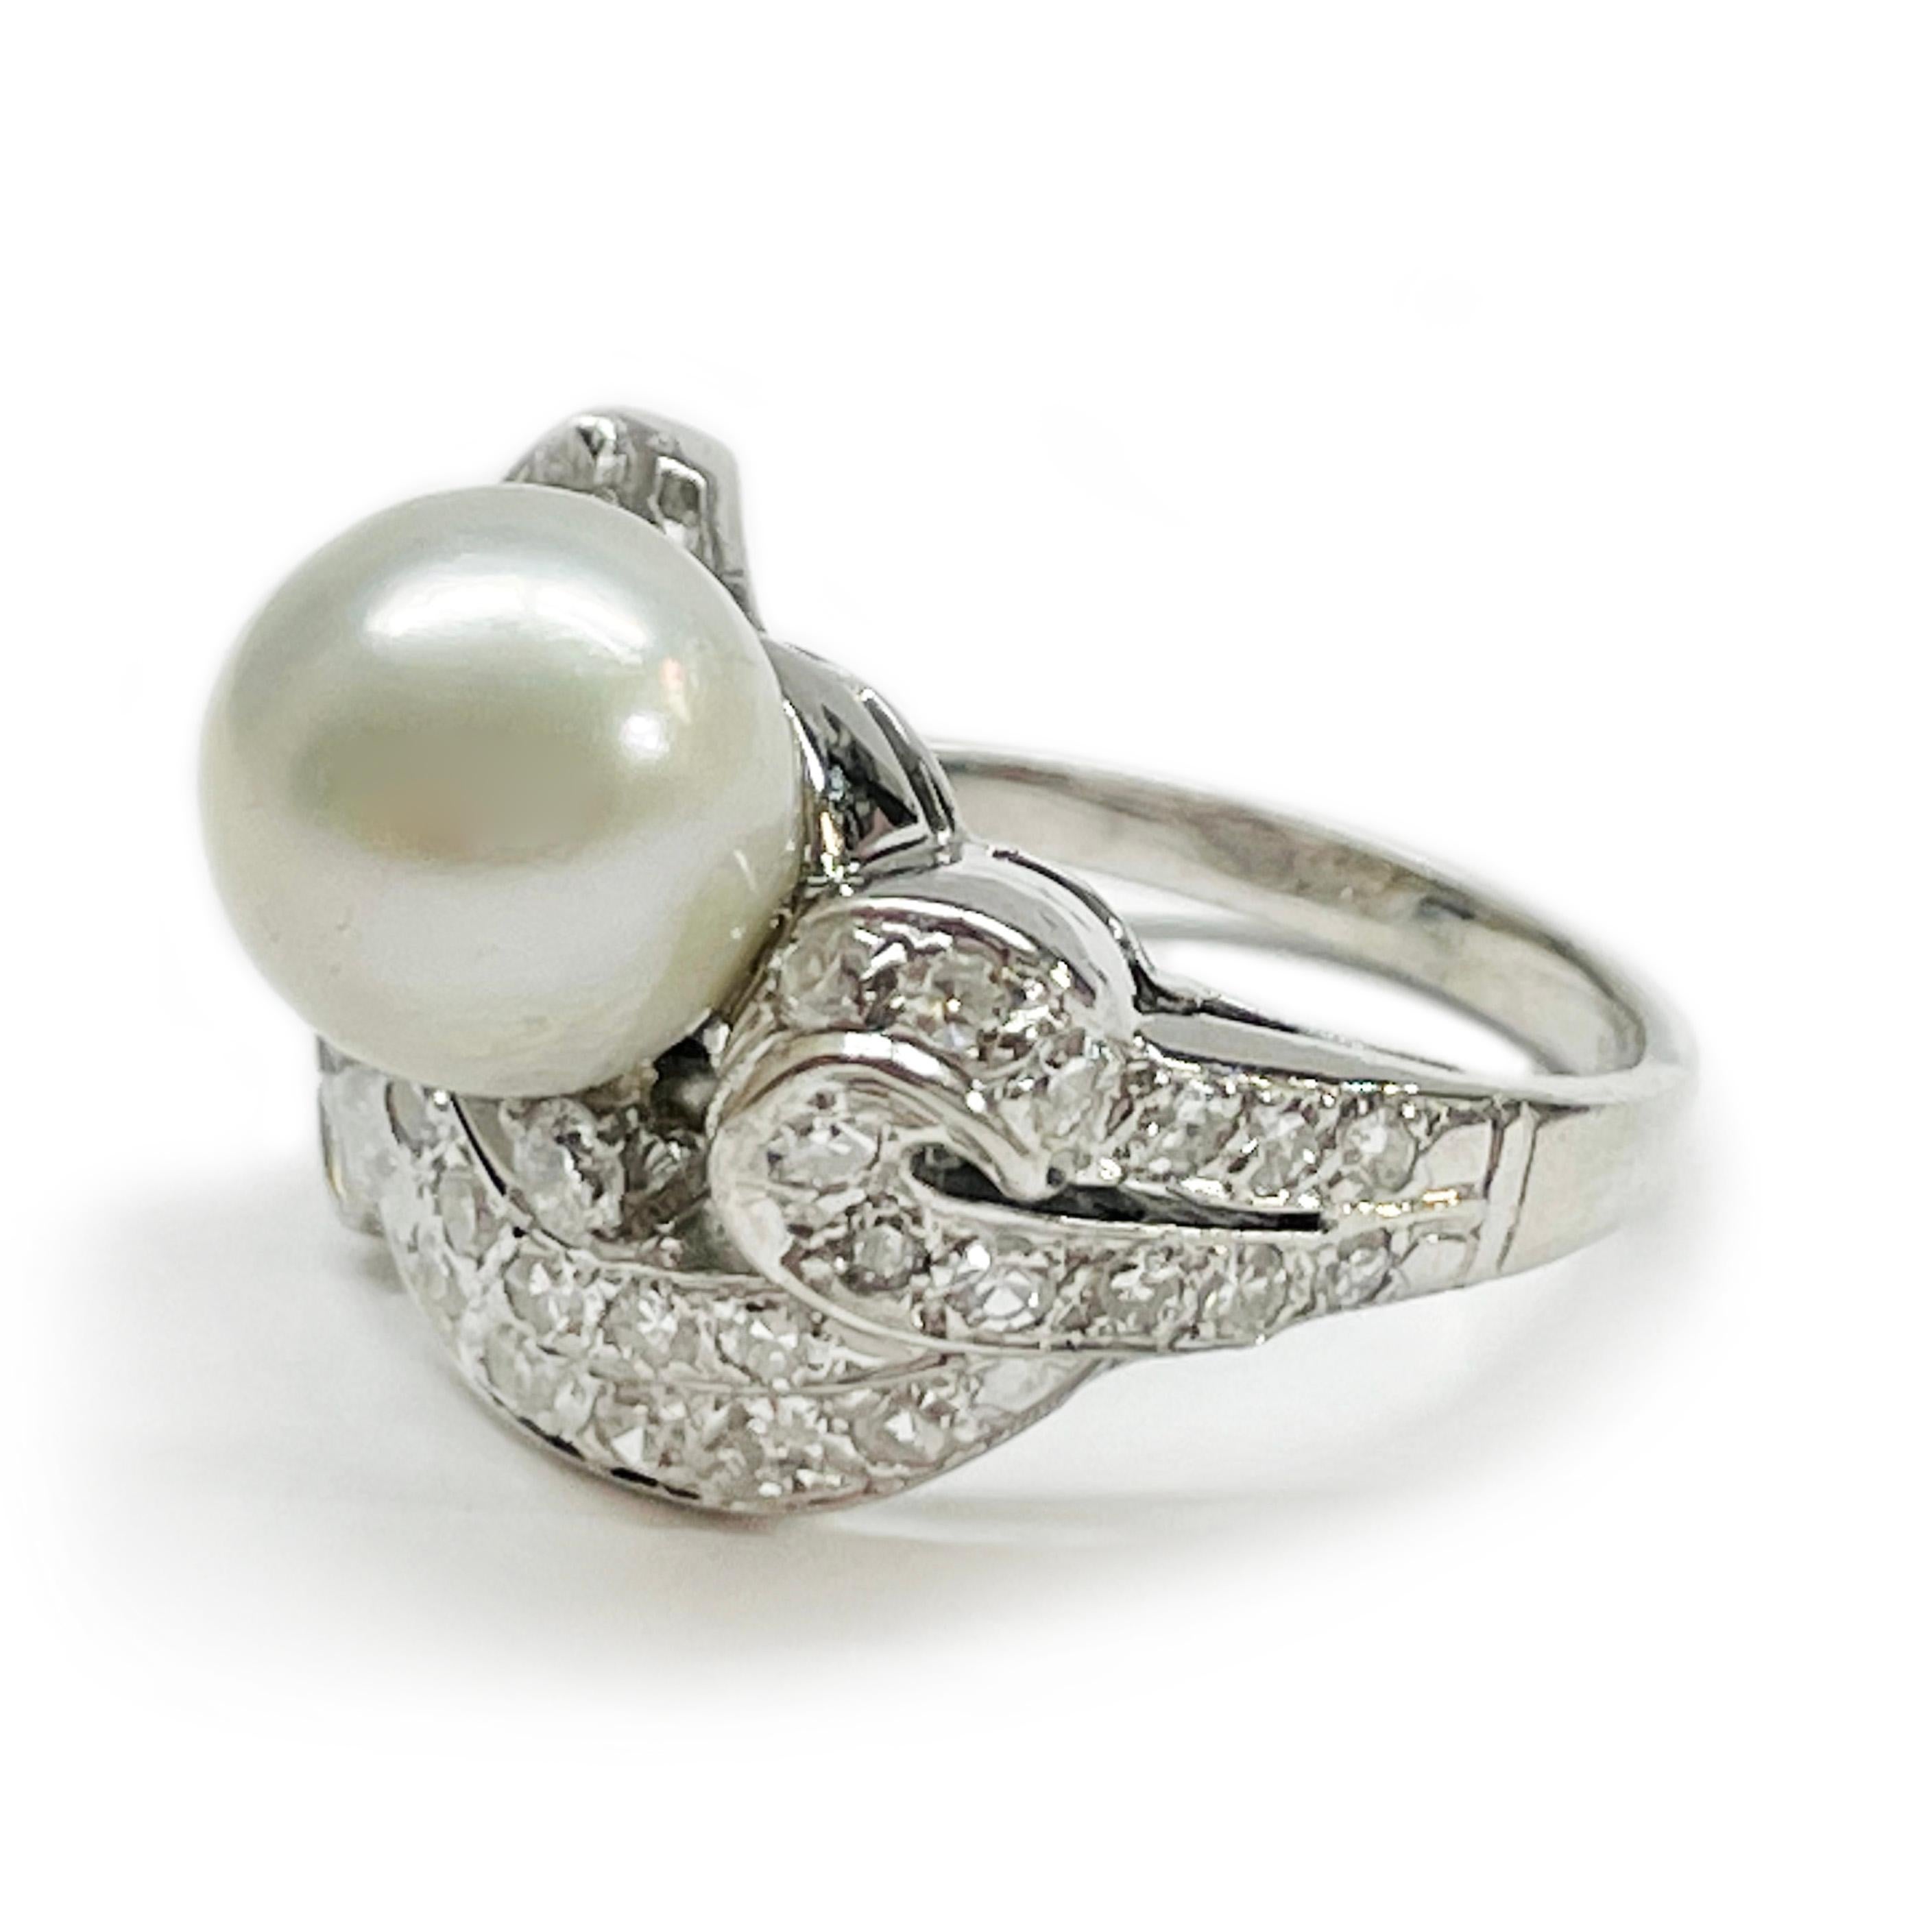 14 Karat White Gold Freshwater Pearl Diamond Ring. The ring features a 9mm center freshwater pearl with baguette and round diamonds. The asymmetrical design consists of milgrain detail and twenty-five round diamonds weighing approximately 0.38twc